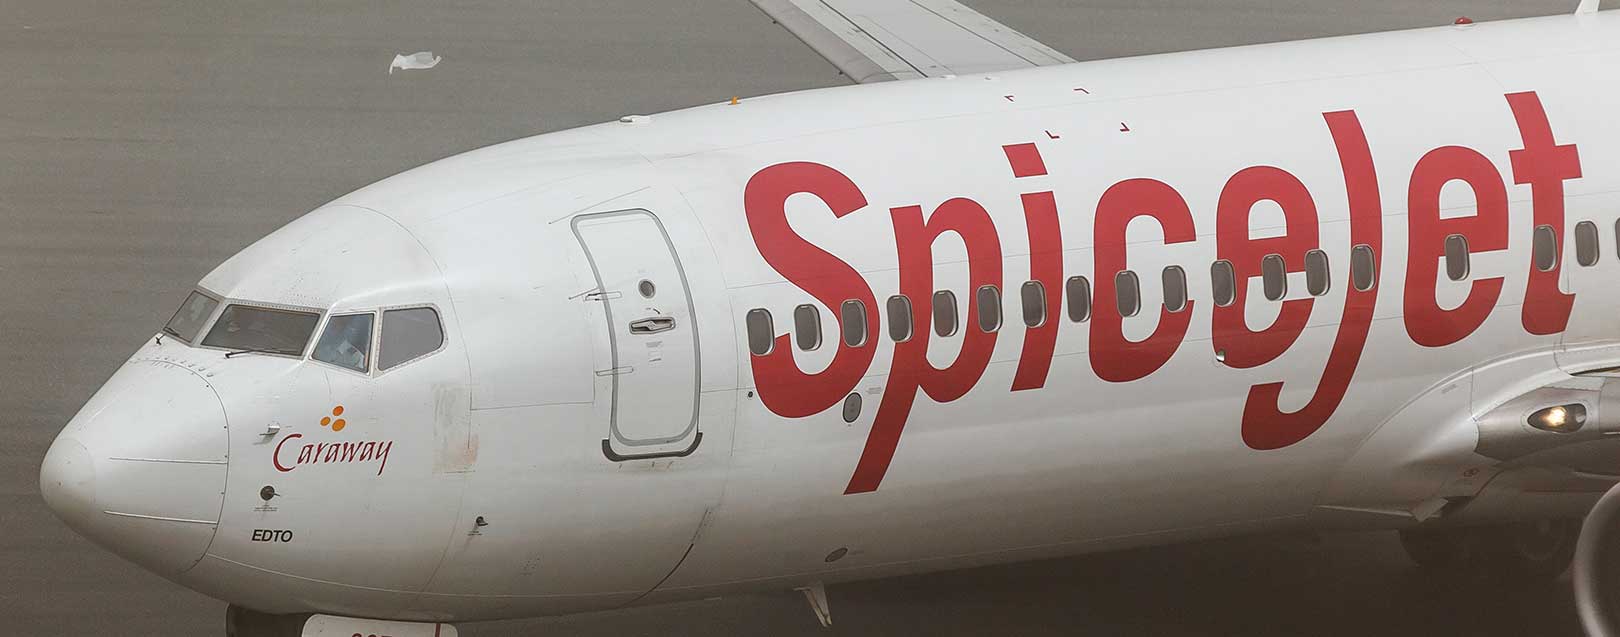 SpiceJet strikes Rs. 1.5 lakh cr deal with Boeing for 205 planes